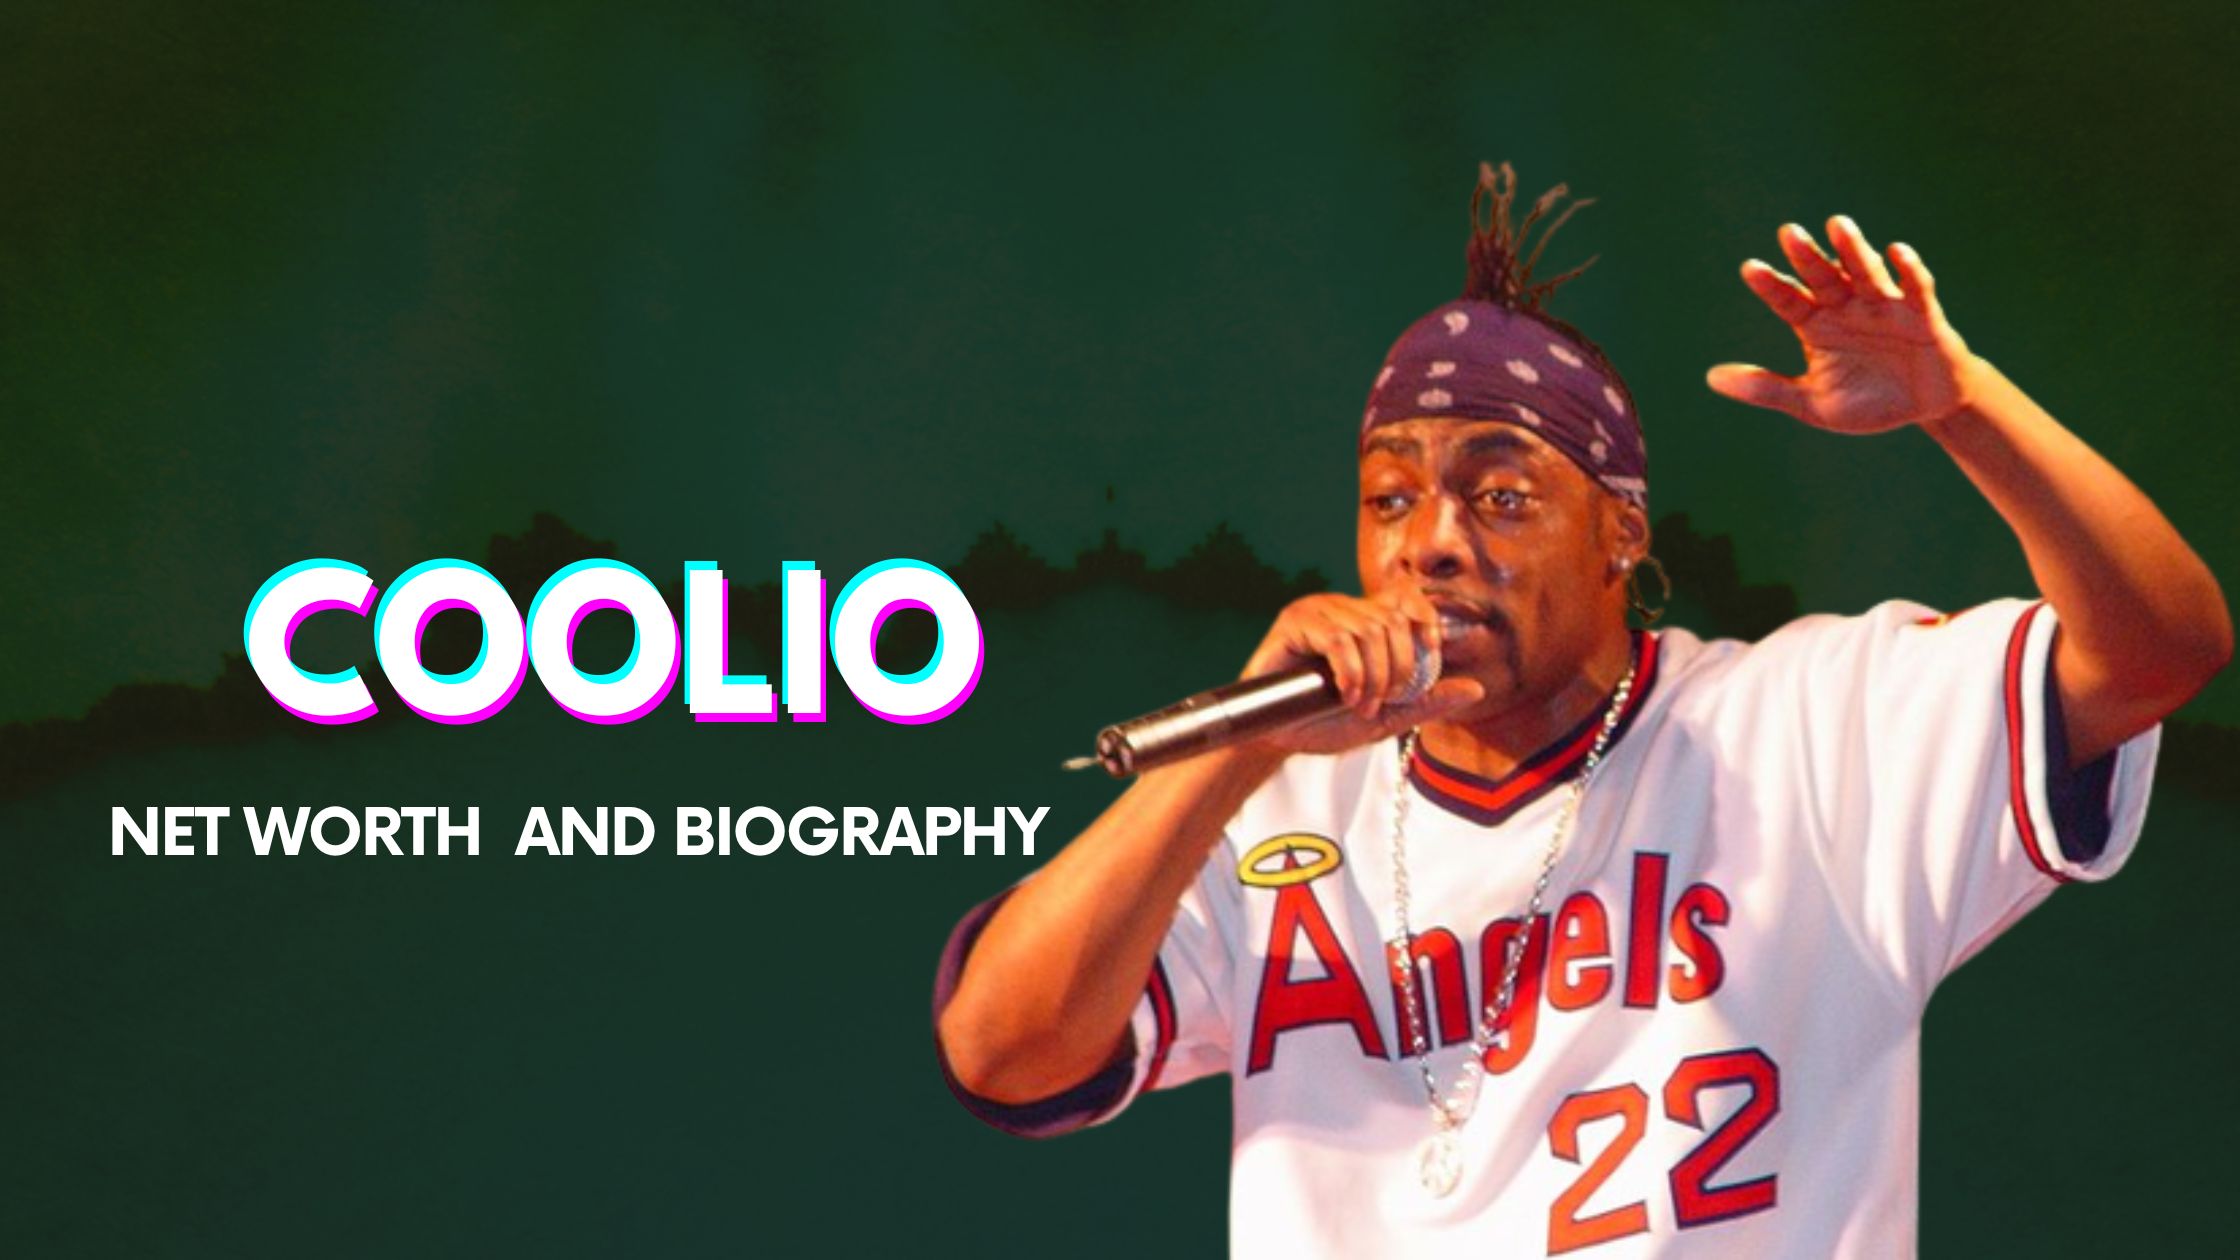 Coolio Net Worth And Biography (2022)